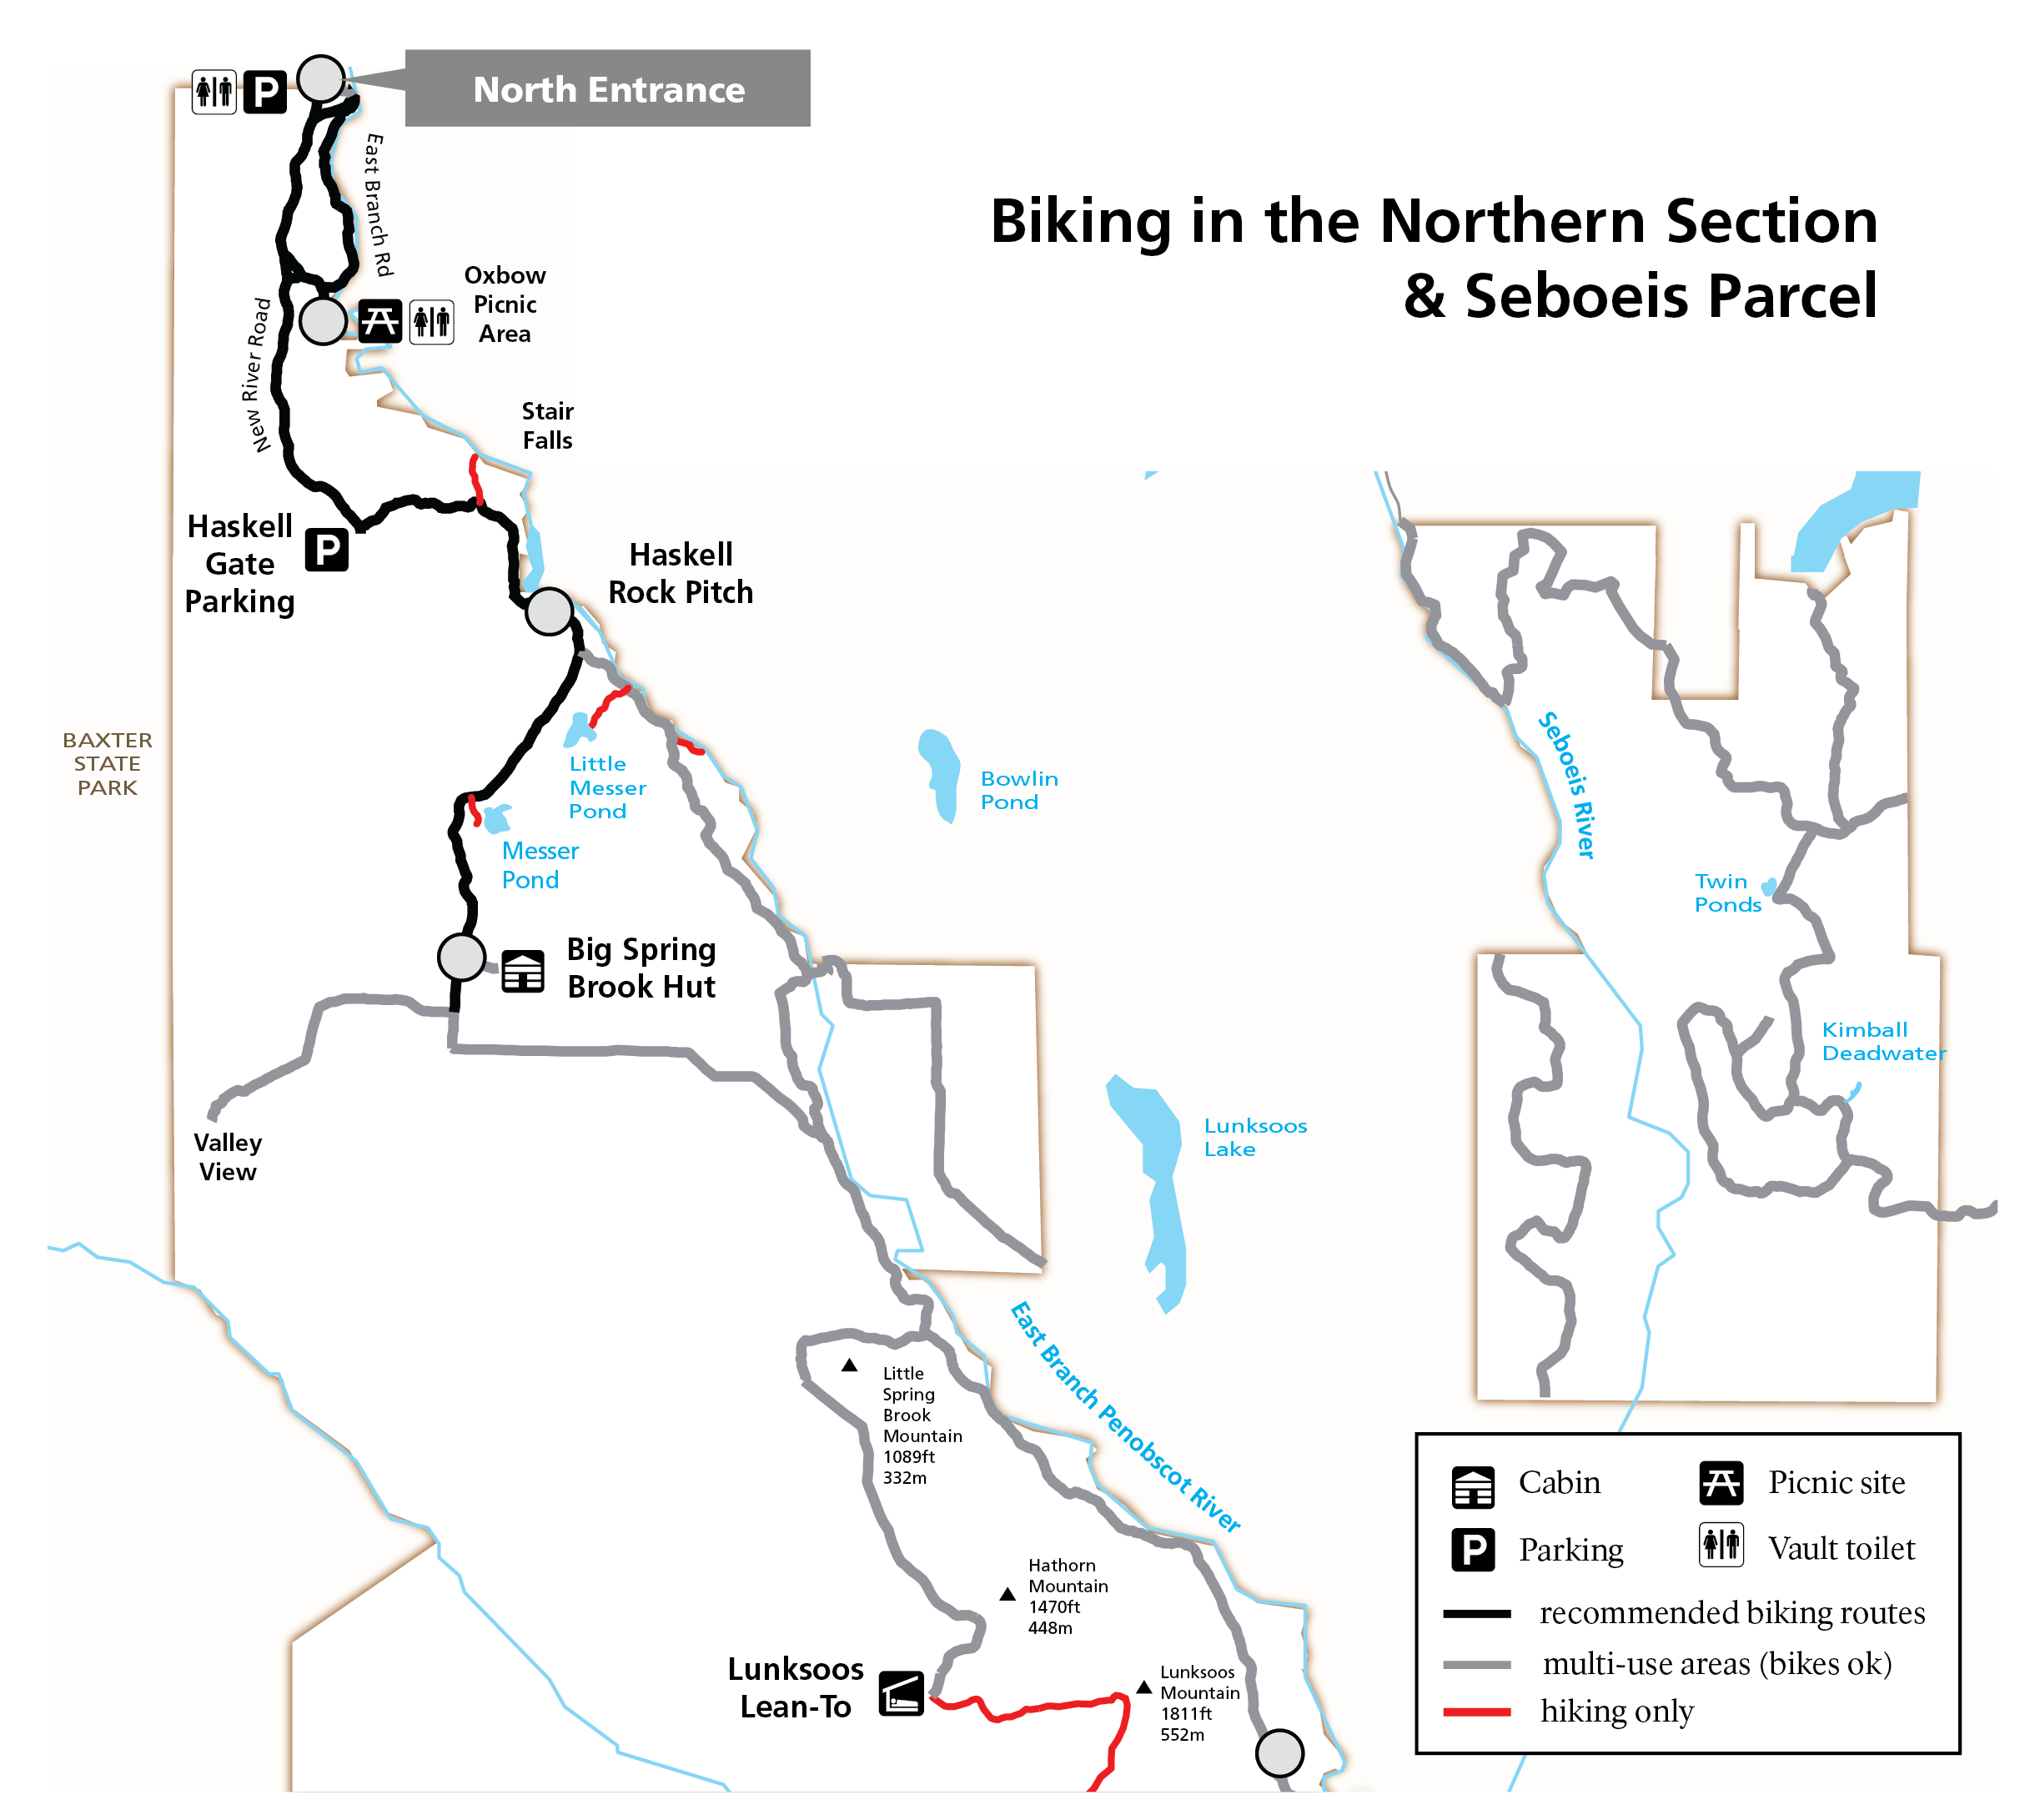 A map of biking routes in the northern section. Routes highlighted are; recommended routes, multiuse areas, and areas for hiking only.